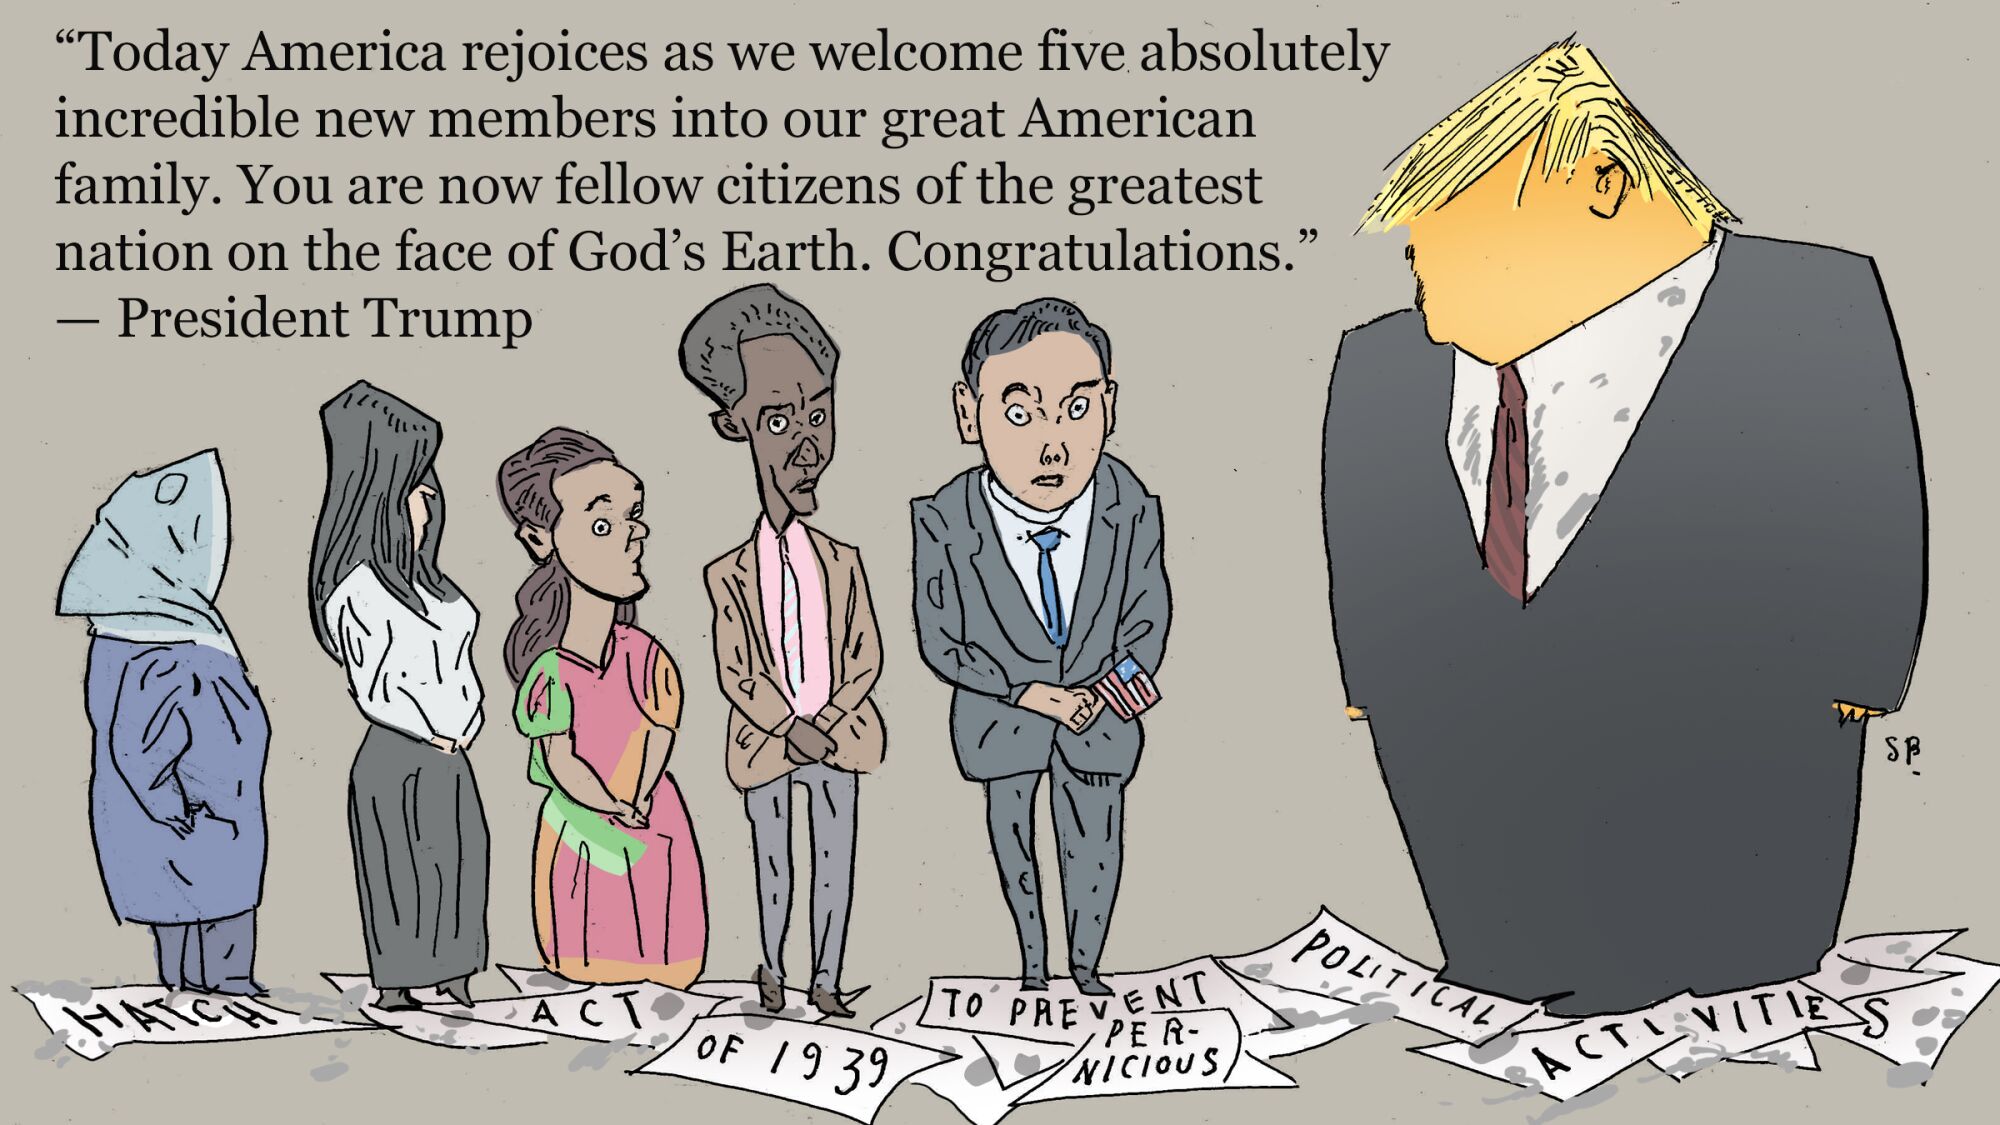 Steve Brodner's illustrated takeaways from Day Two at the 2020 Republican National Convention